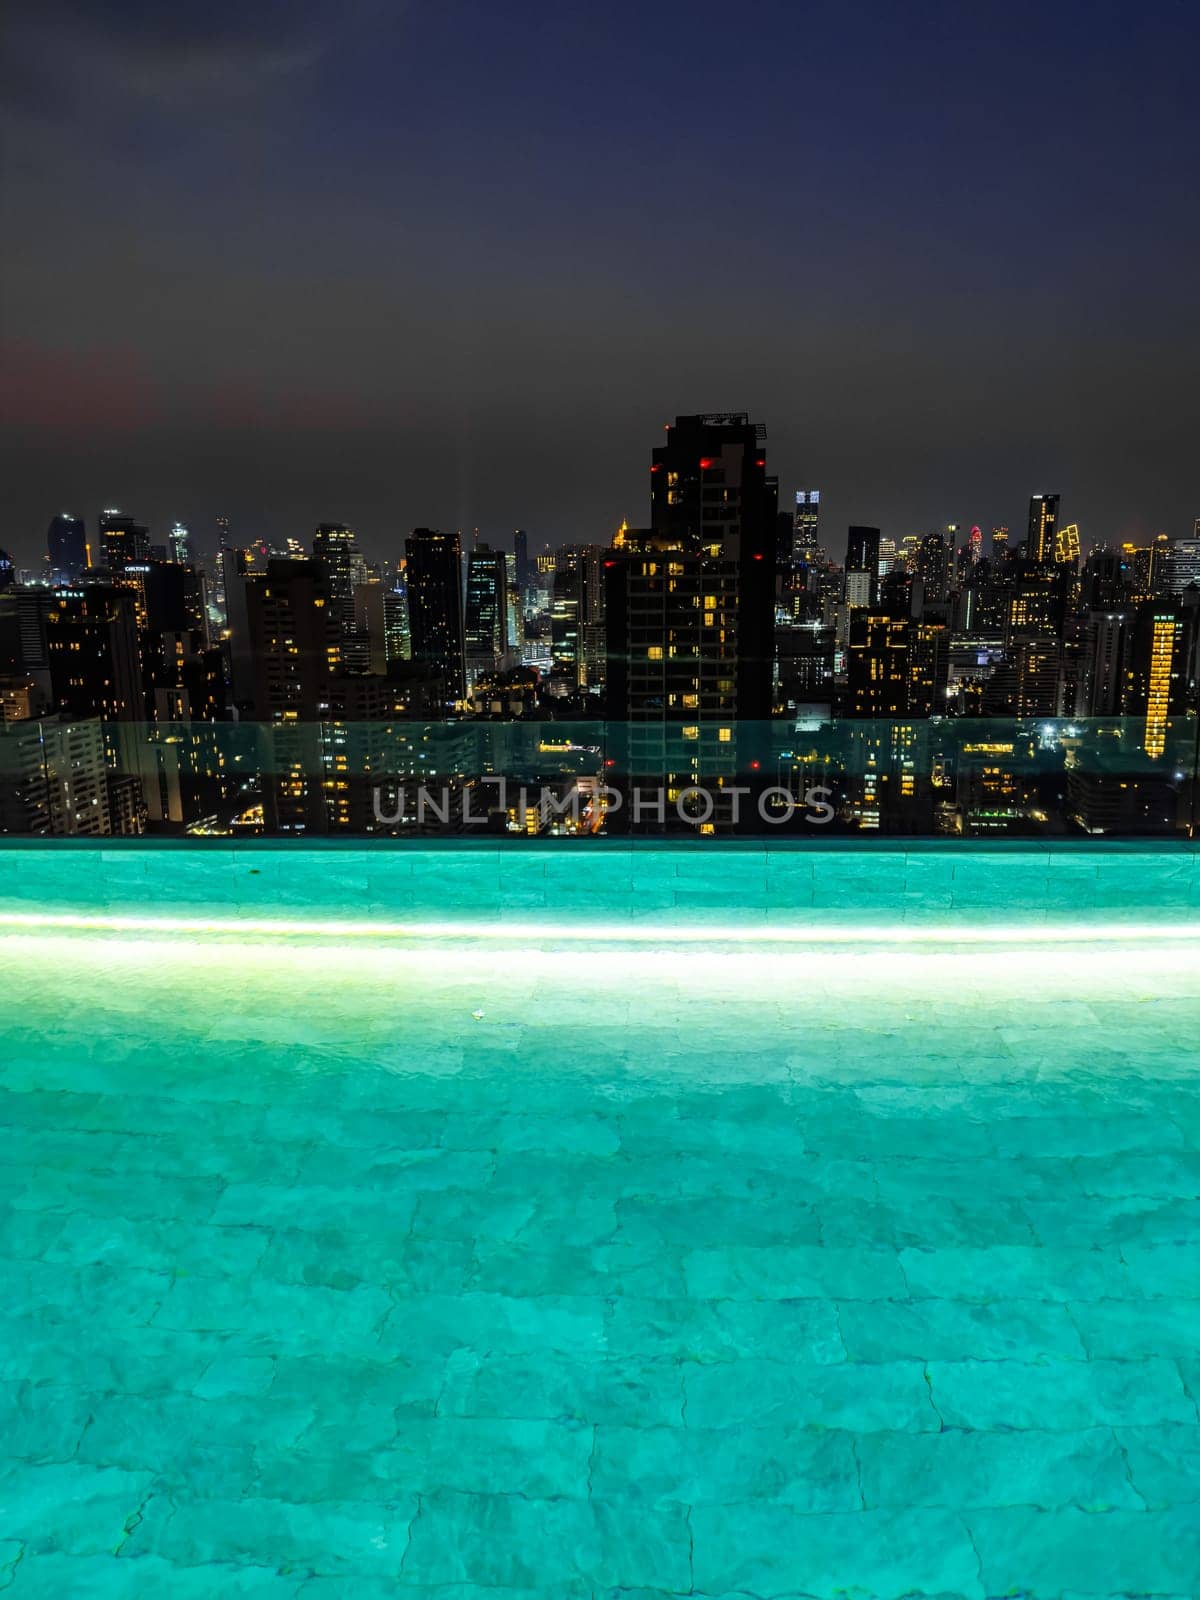 Rooftop pool with Bangkok skyline view at sunset, in Bangkok Thailand, south east asia